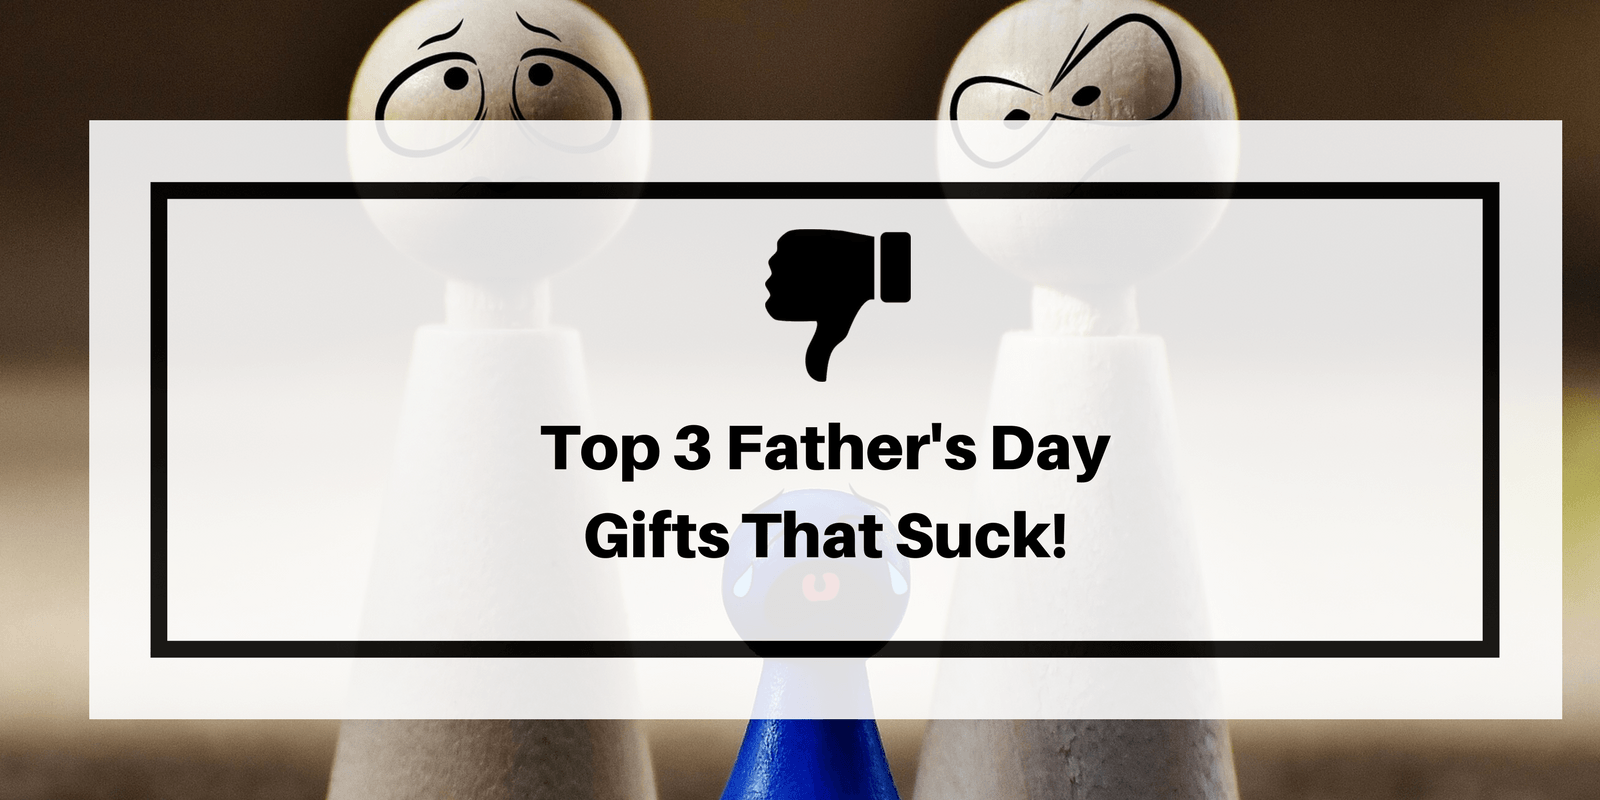 Worst Father's Day Gifts